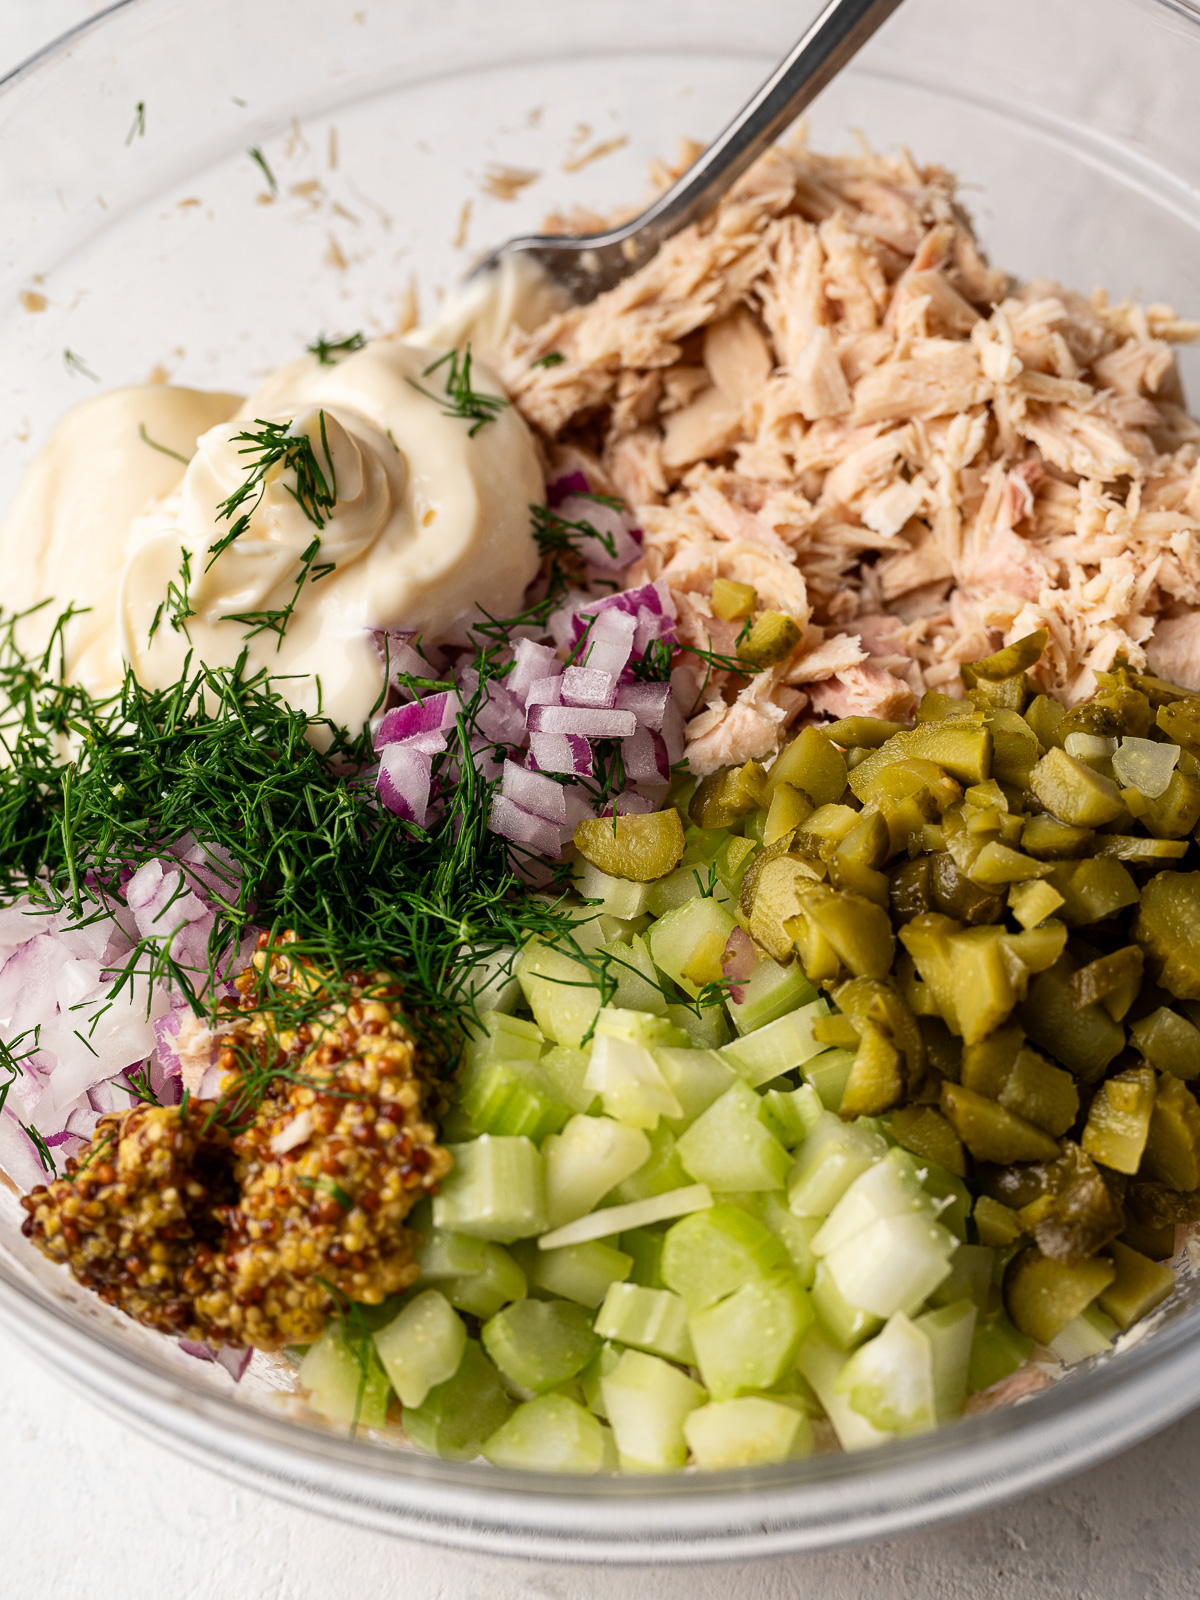 mayo, red onions, celery pickles and dill added to the tuna